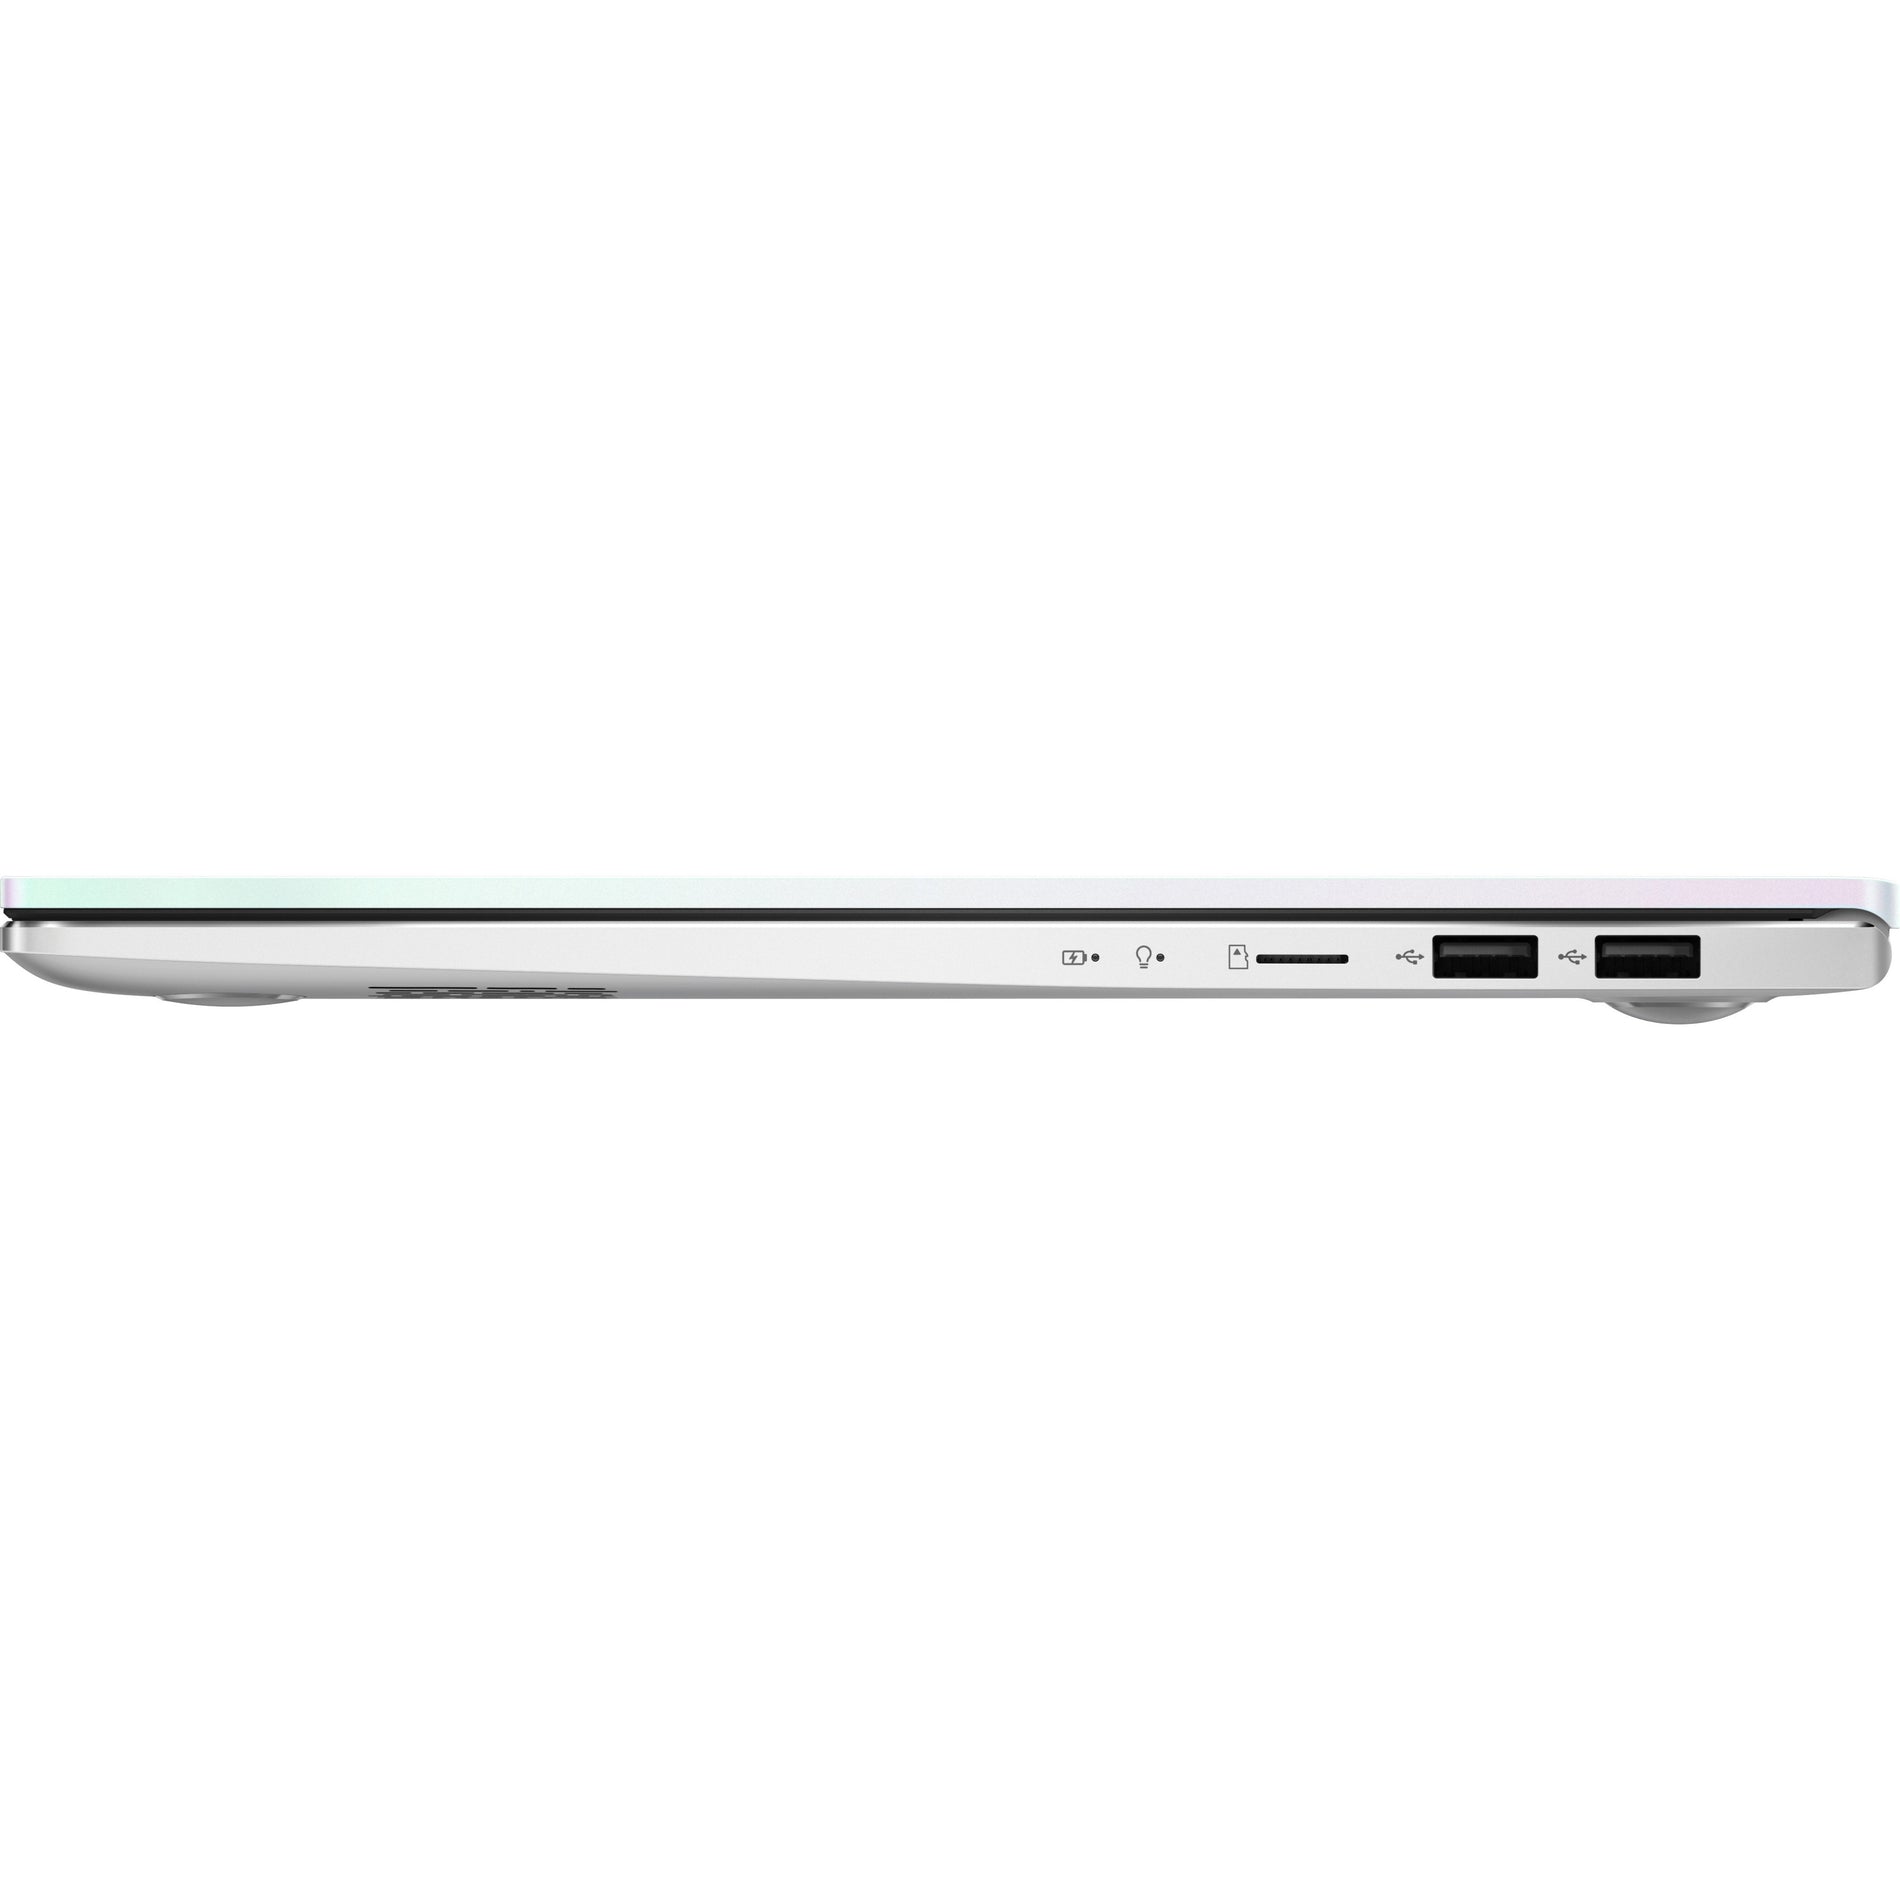 Asus VivoBook S15 S533 S533EA-DH74-WH 15.6" Notebook - Full HD - 1920 x 1080 - Intel Core i7 i7-1165G7 Quad-core (4 Core) 2.80 GHz - 16 GB Total RAM - 512 GB SSD Left image